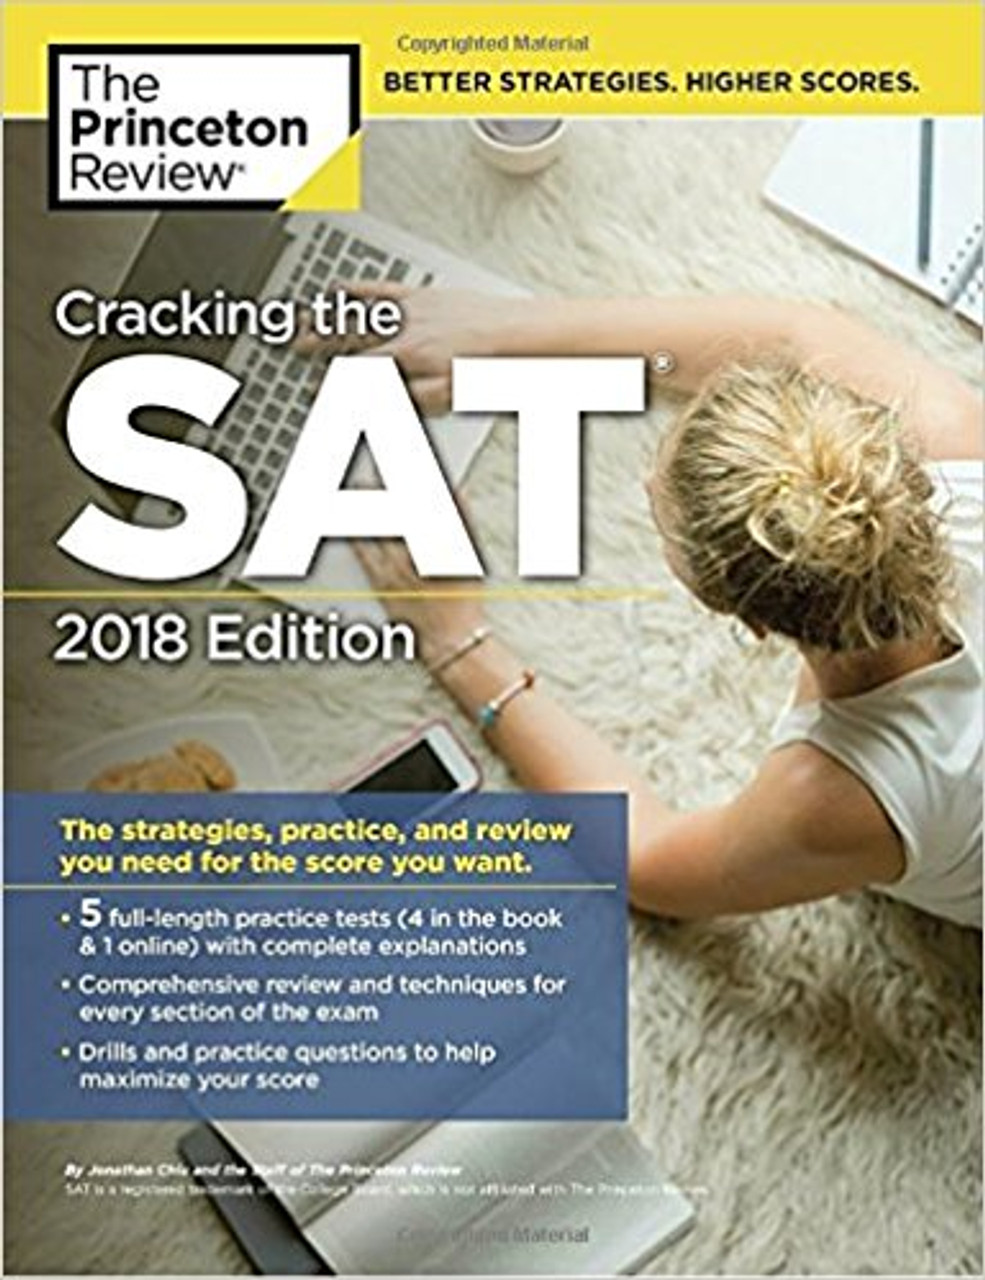 Crracking the SAT with 5 Practice Tests, 2018 Edition: The Strategies, Practice, and Review You Need for the Score You Want by Princeton Review